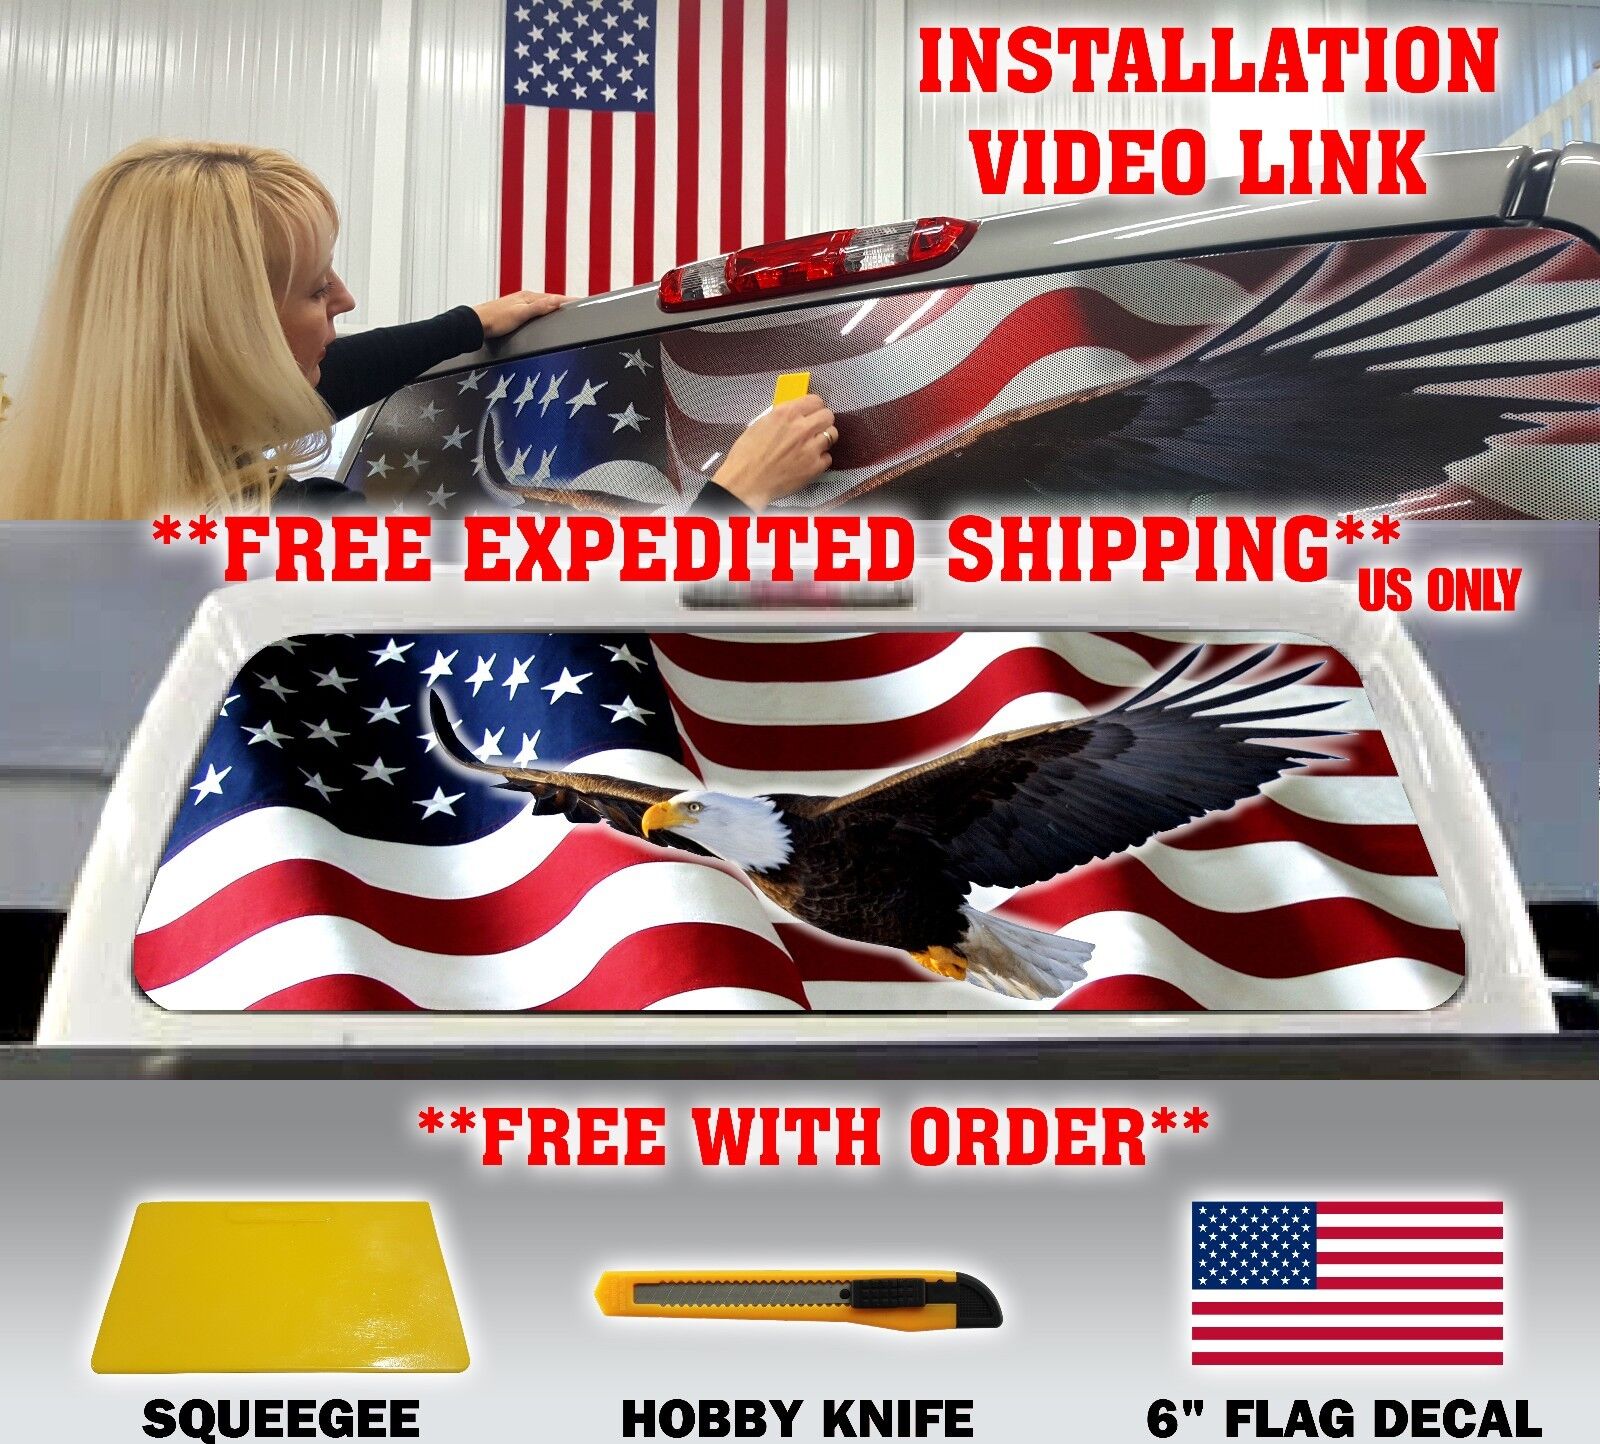 AMERICAN FLAG EAGLE PICK-UP TRUCK REAR WINDOW GRAPHIC DECAL PERFORATED VINYL..